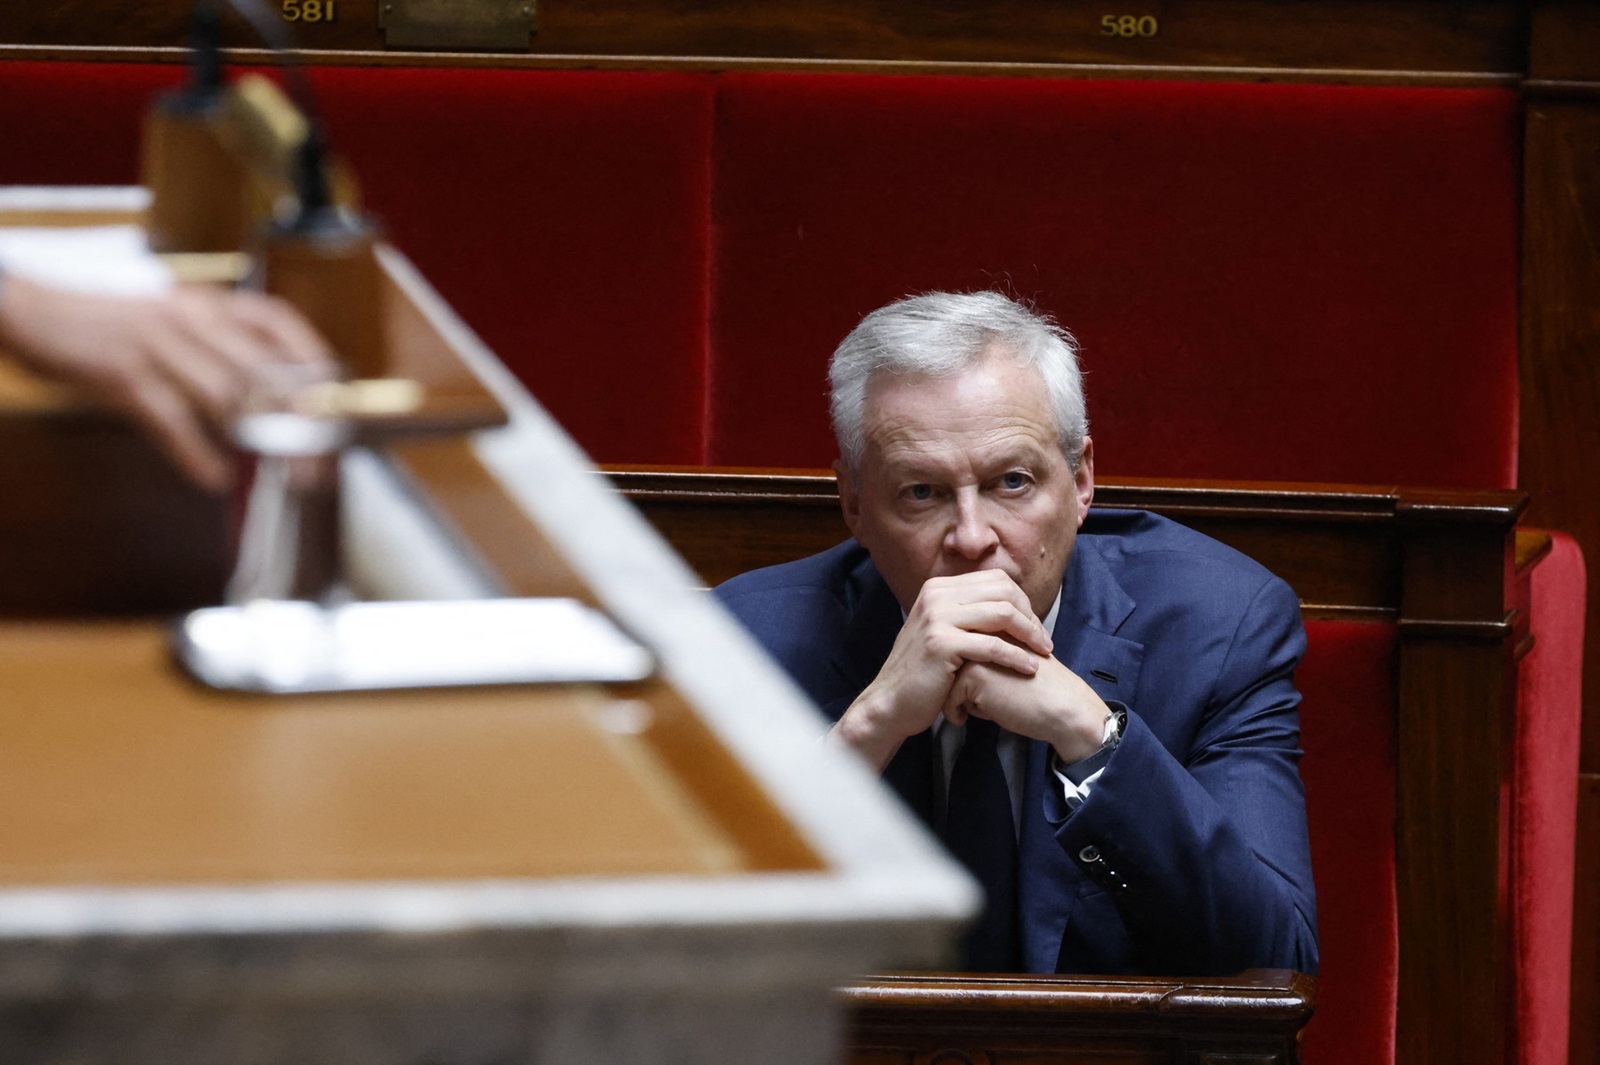 France's Minister for Economy and Finances Bruno Le Maire looks on as he attends a parliamentary session debate on the right-to-die bill, widely referred to as focussing on "end of life" or "aid in dying", at the National Assembly in Paris on June 3, 2024.,Image: 878541039, License: Rights-managed, Restrictions: , Model Release: no, Credit line: Ludovic MARIN / AFP / Profimedia